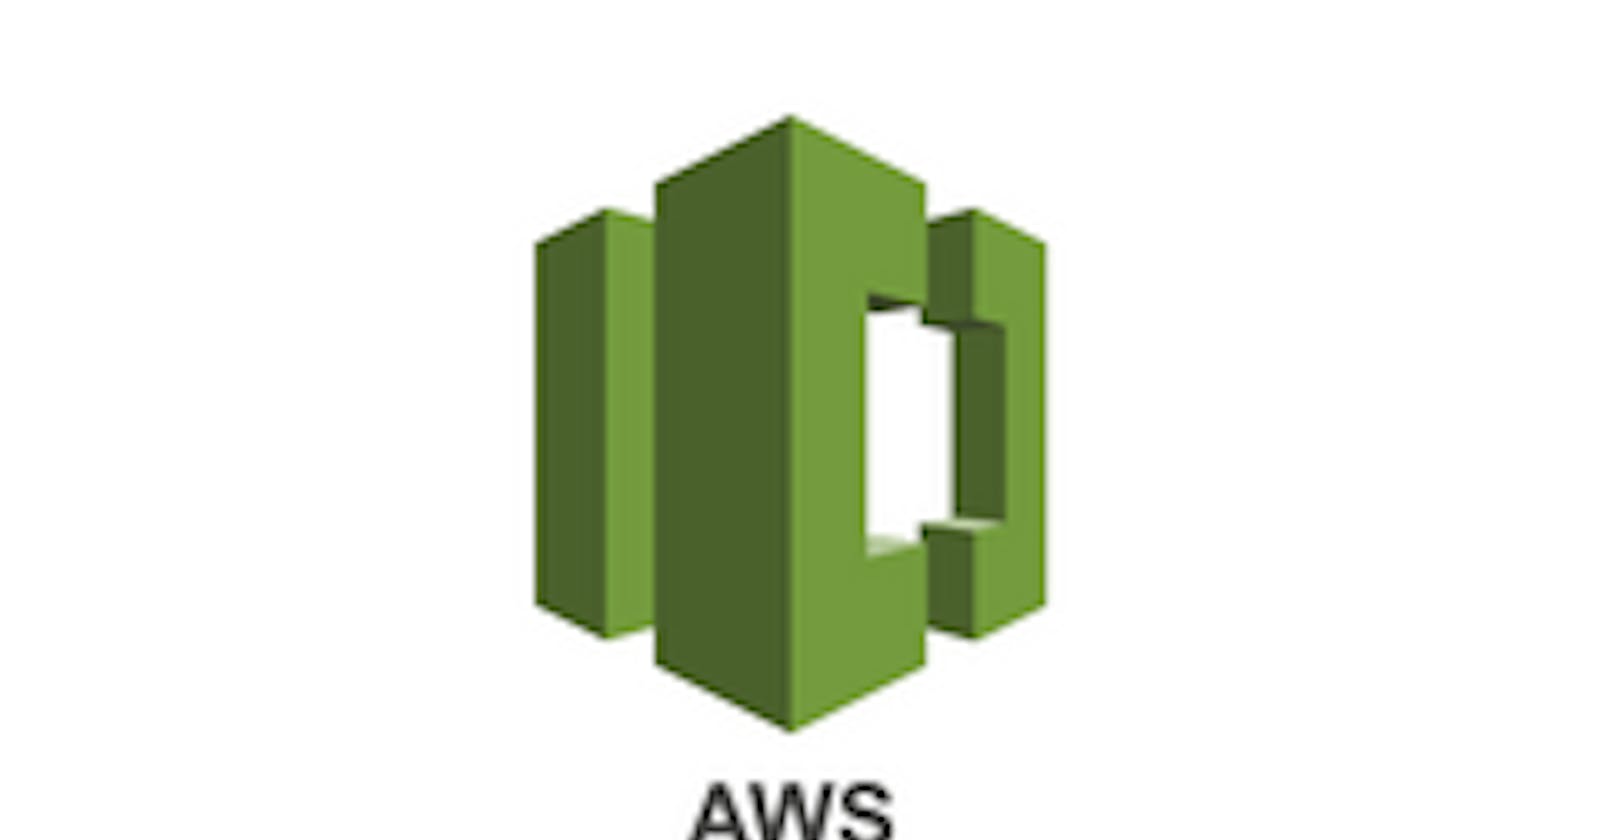 Upload your code to AWS Code-commit